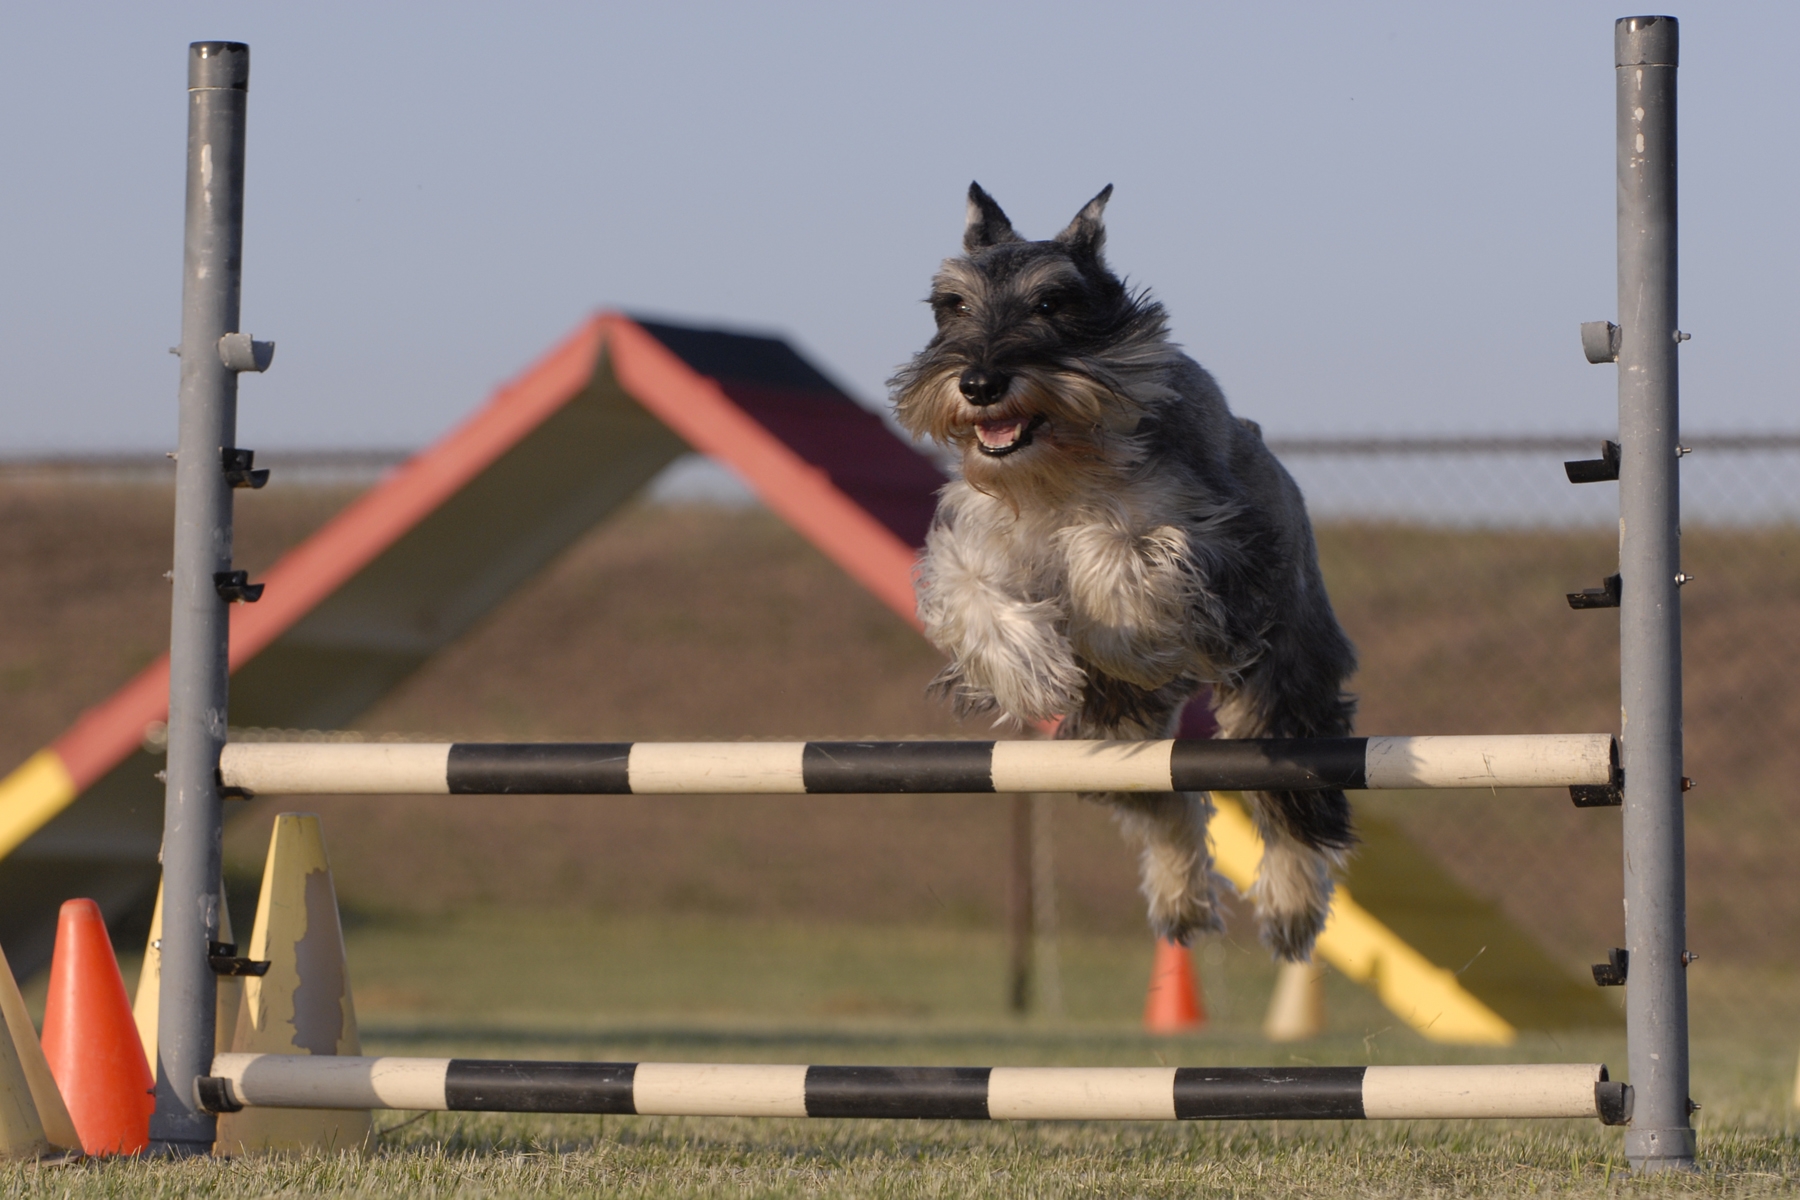 Milo Devine earned Agility titles even into his senior years.